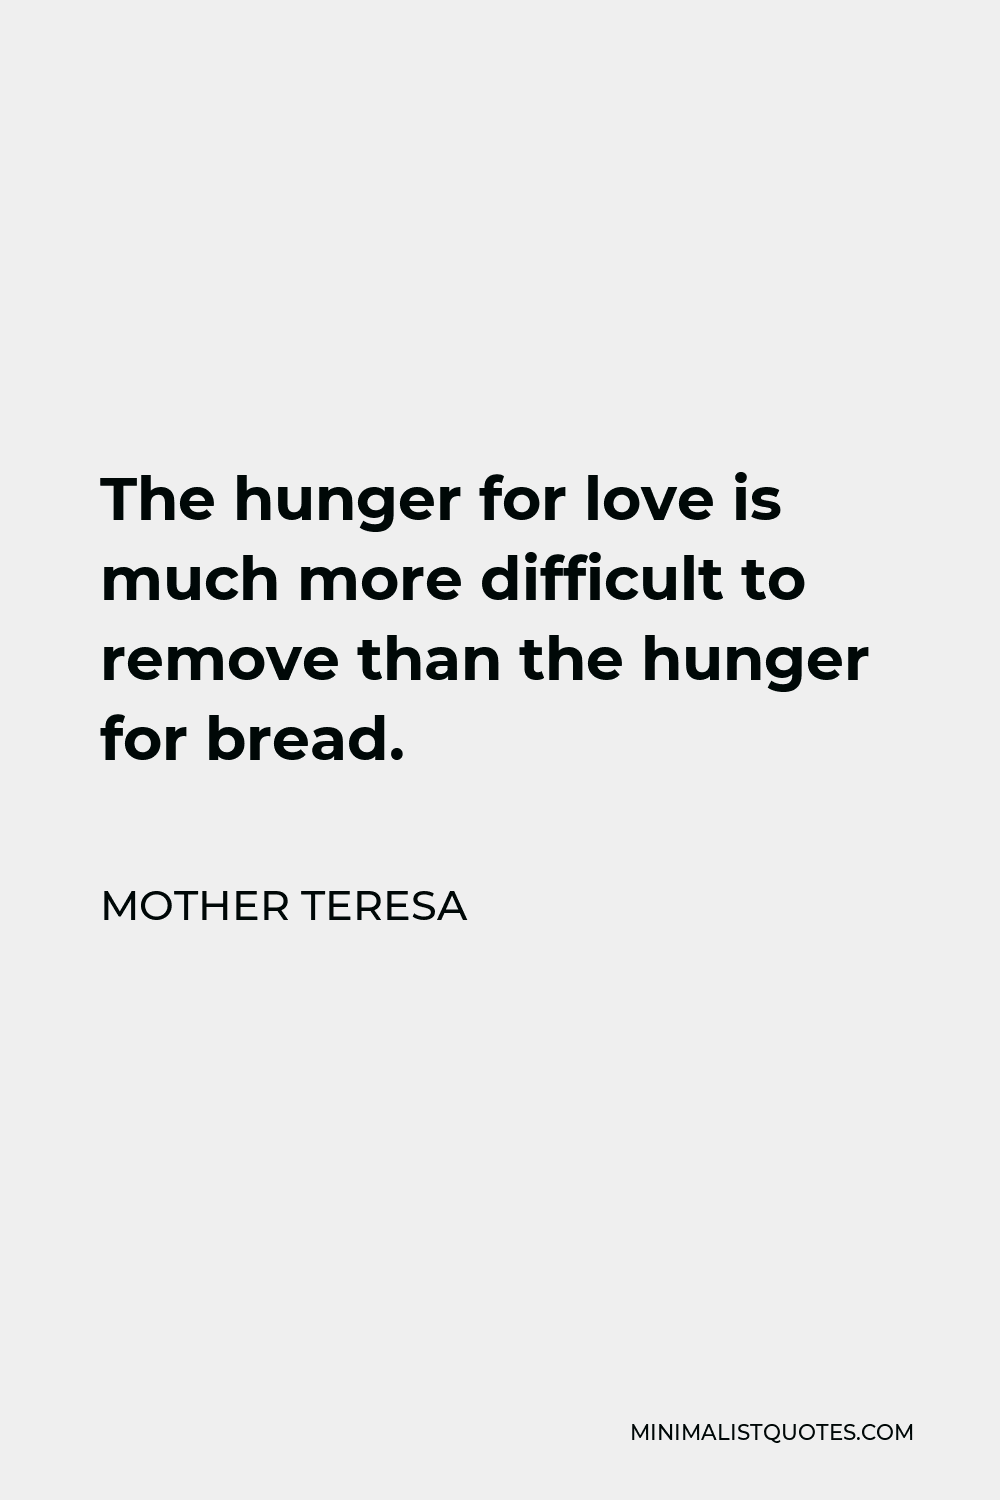 Mother Teresa Quote - The hunger for love is much more difficult to remove than the hunger for bread.